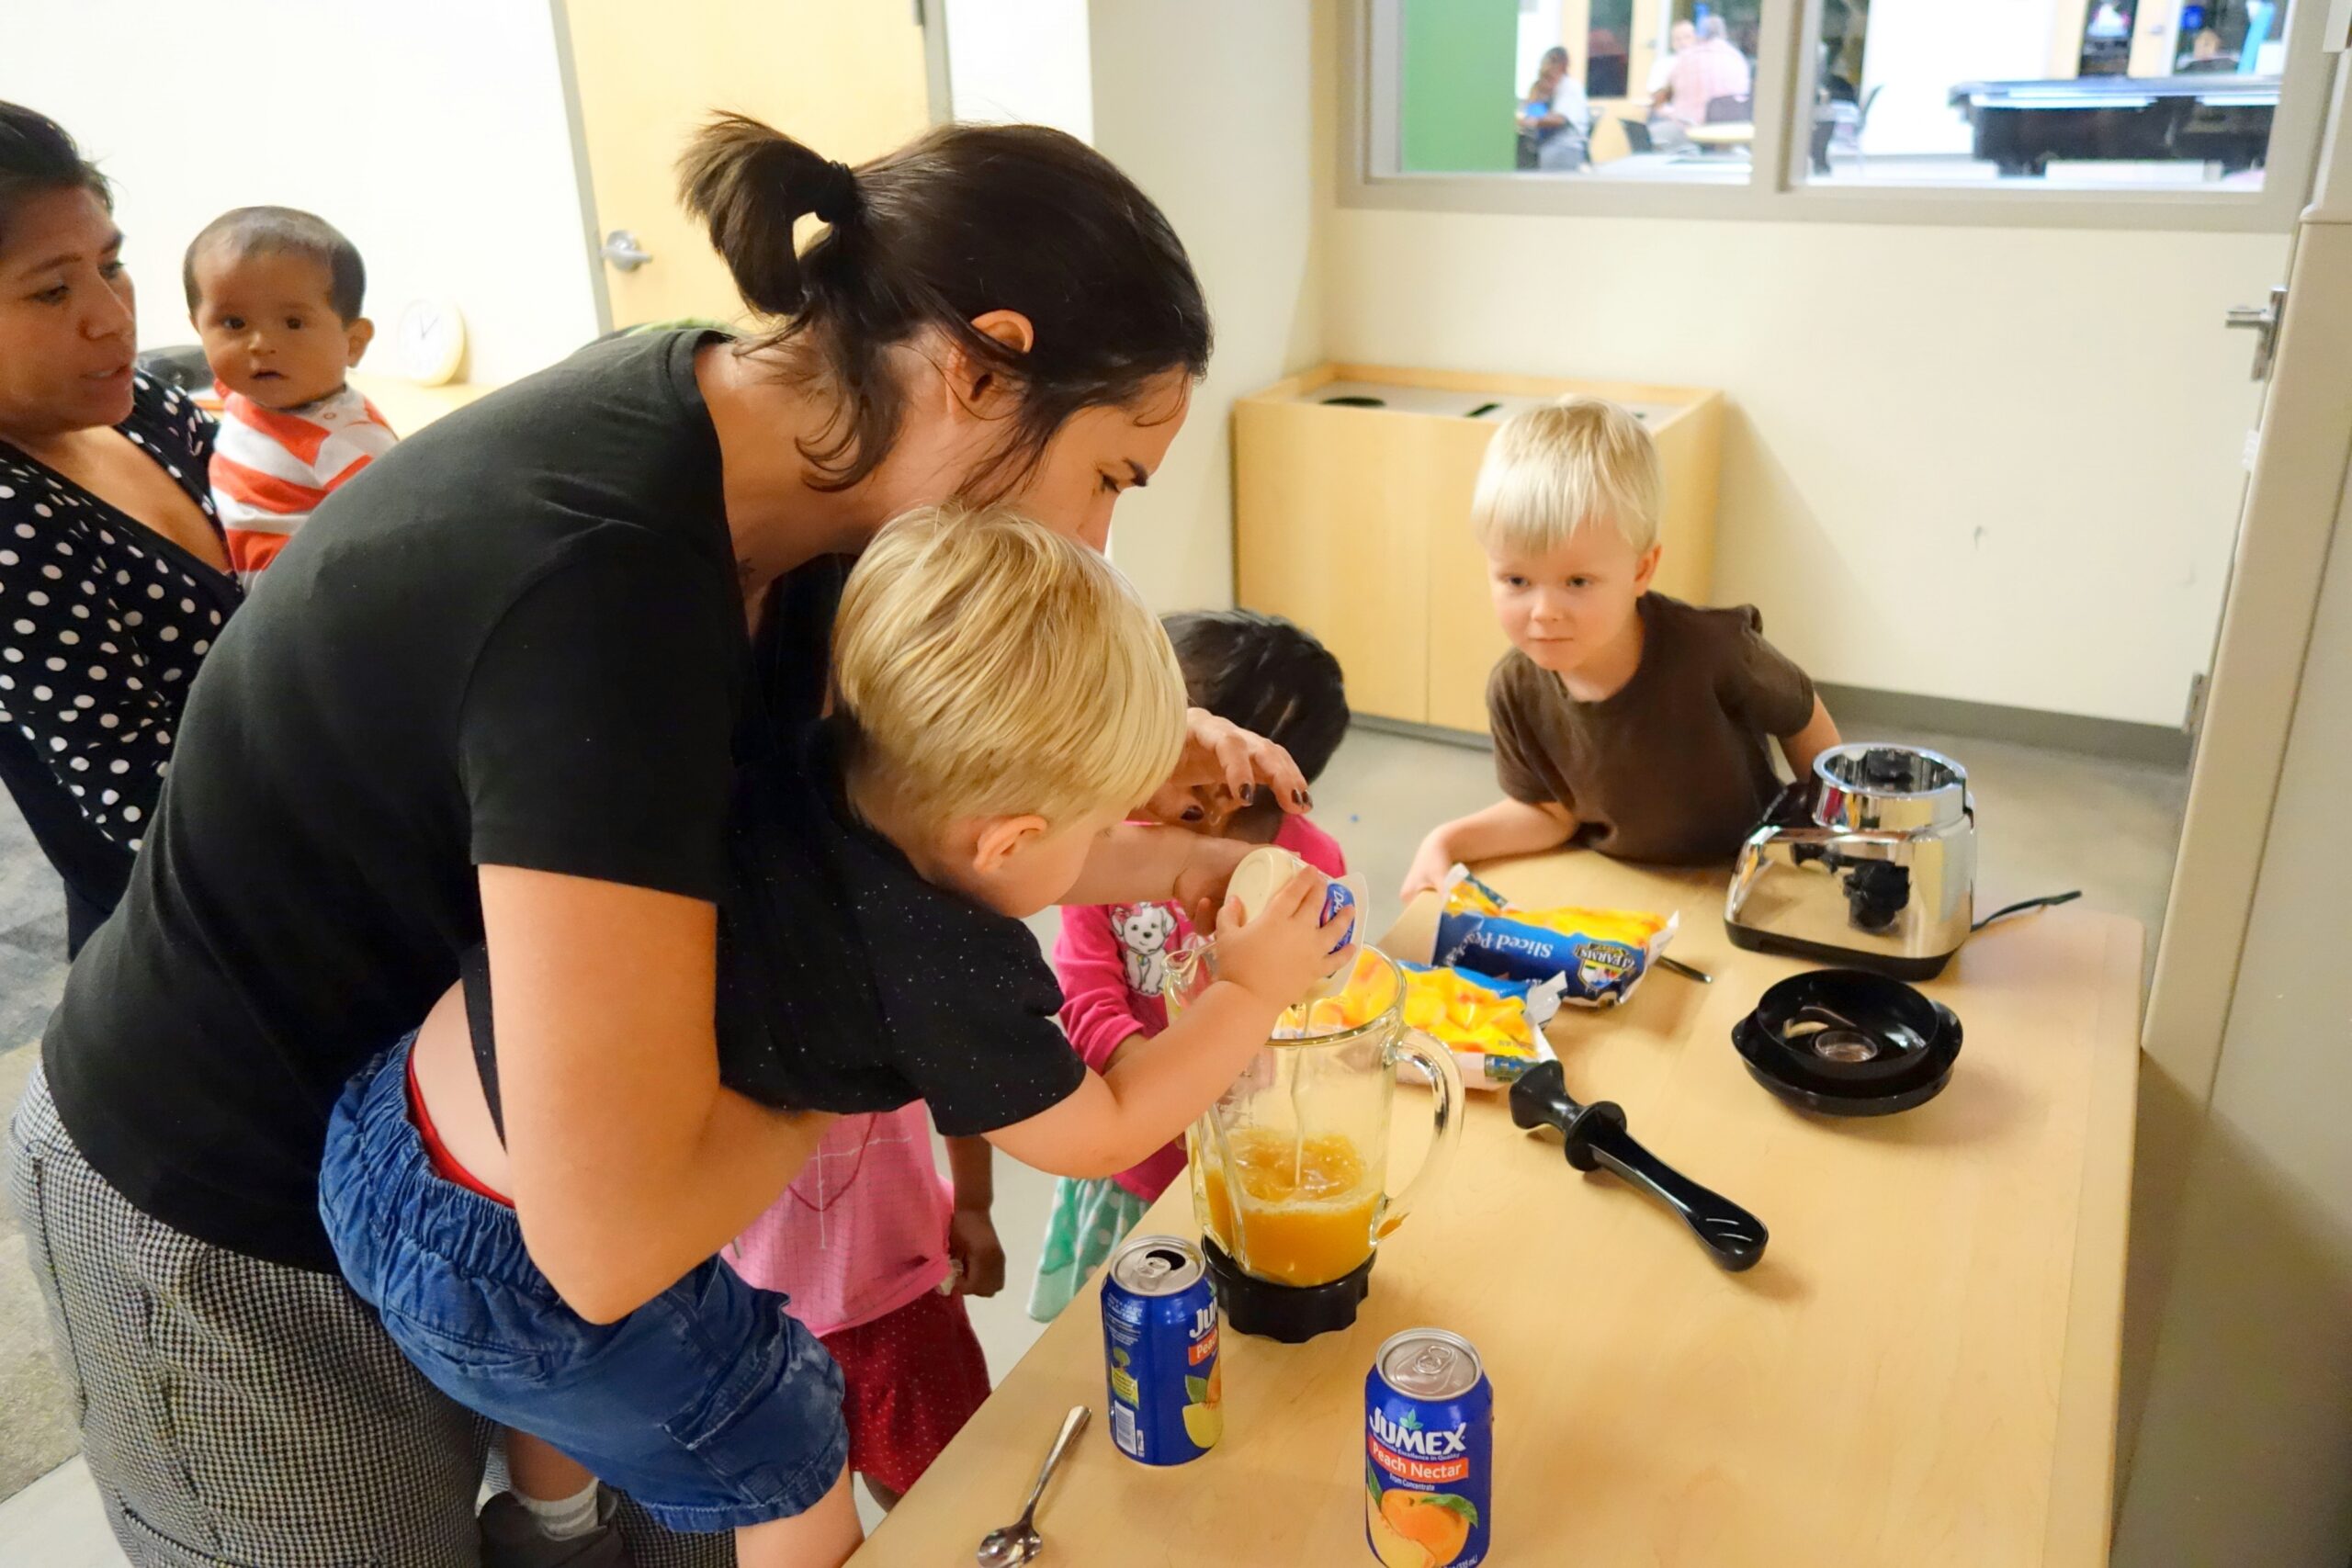 Chef Lily Kilfoy teaching young children to cook at classes held in a local library